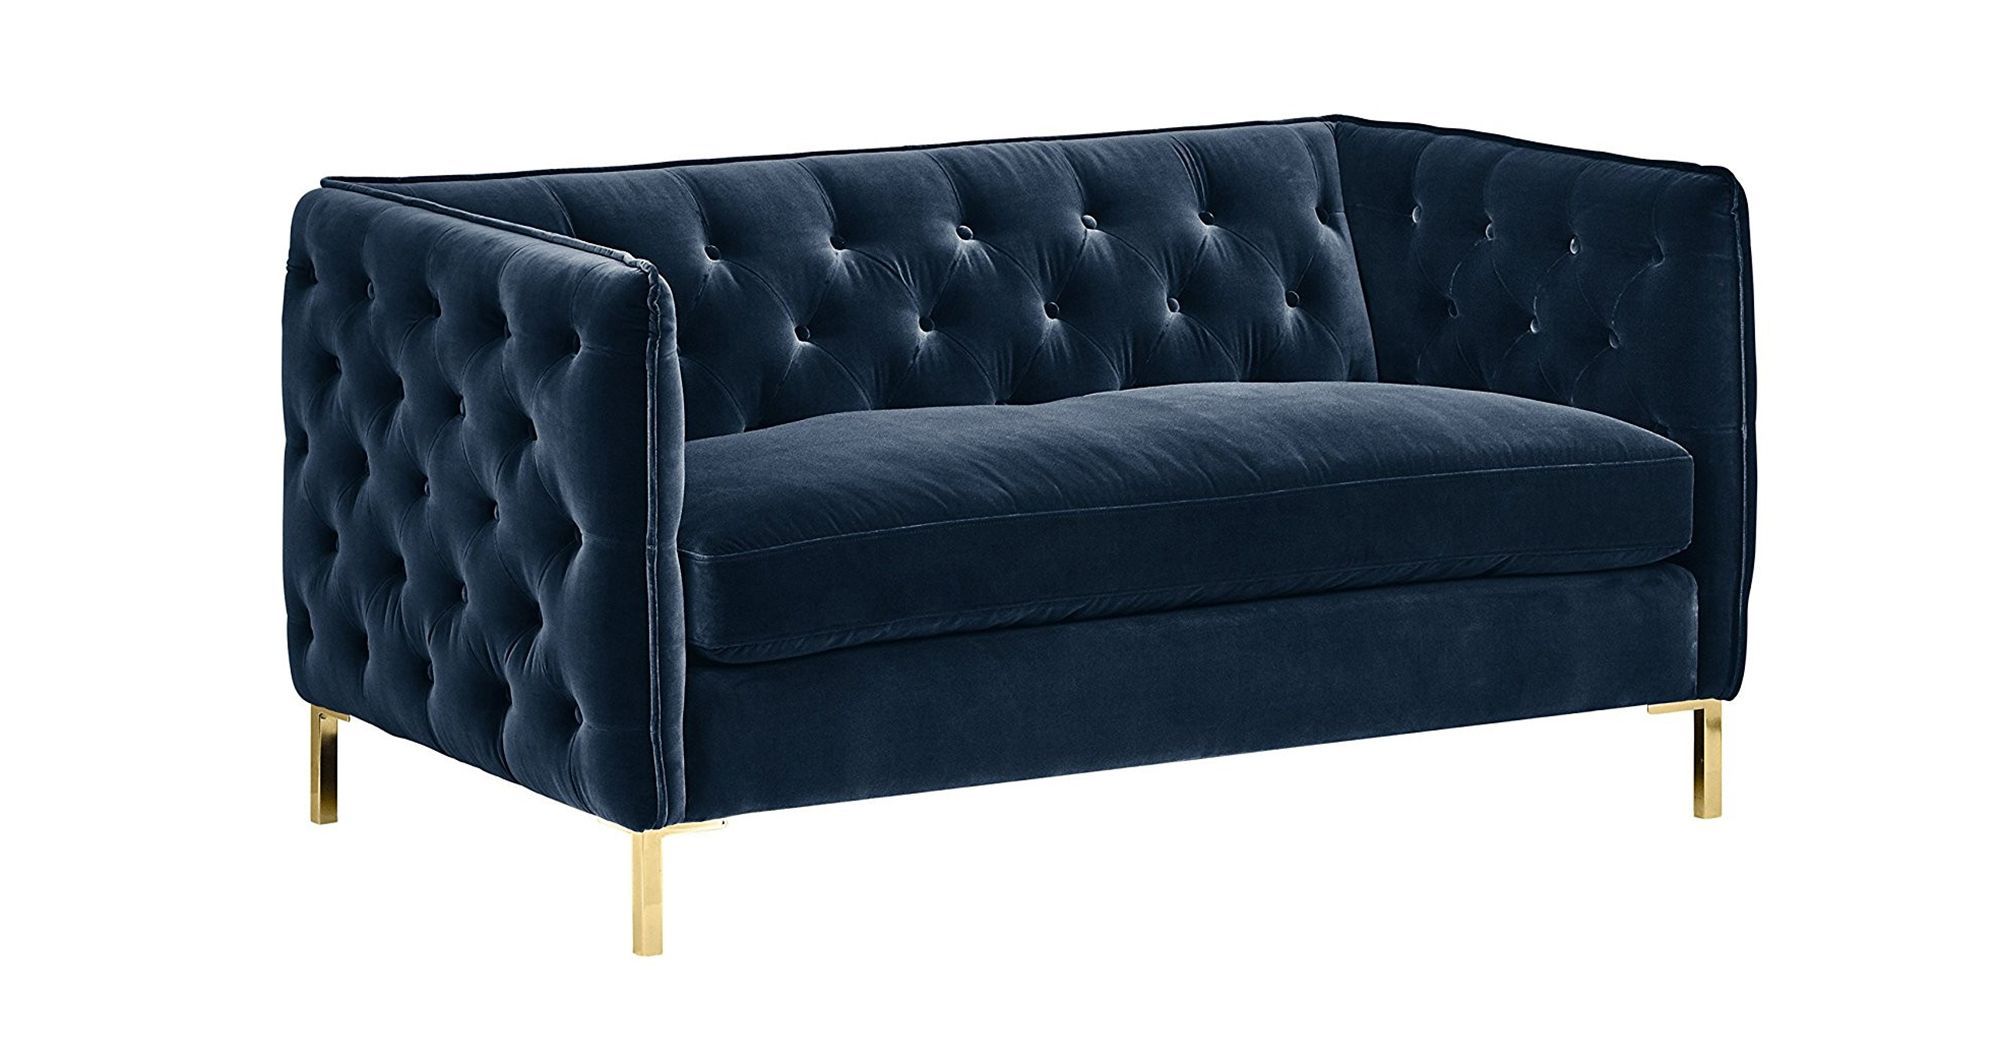 Amazon Prime Day Furniture Deals For Every Room 2018 Throughout London Optical Sofa Chairs (View 18 of 20)